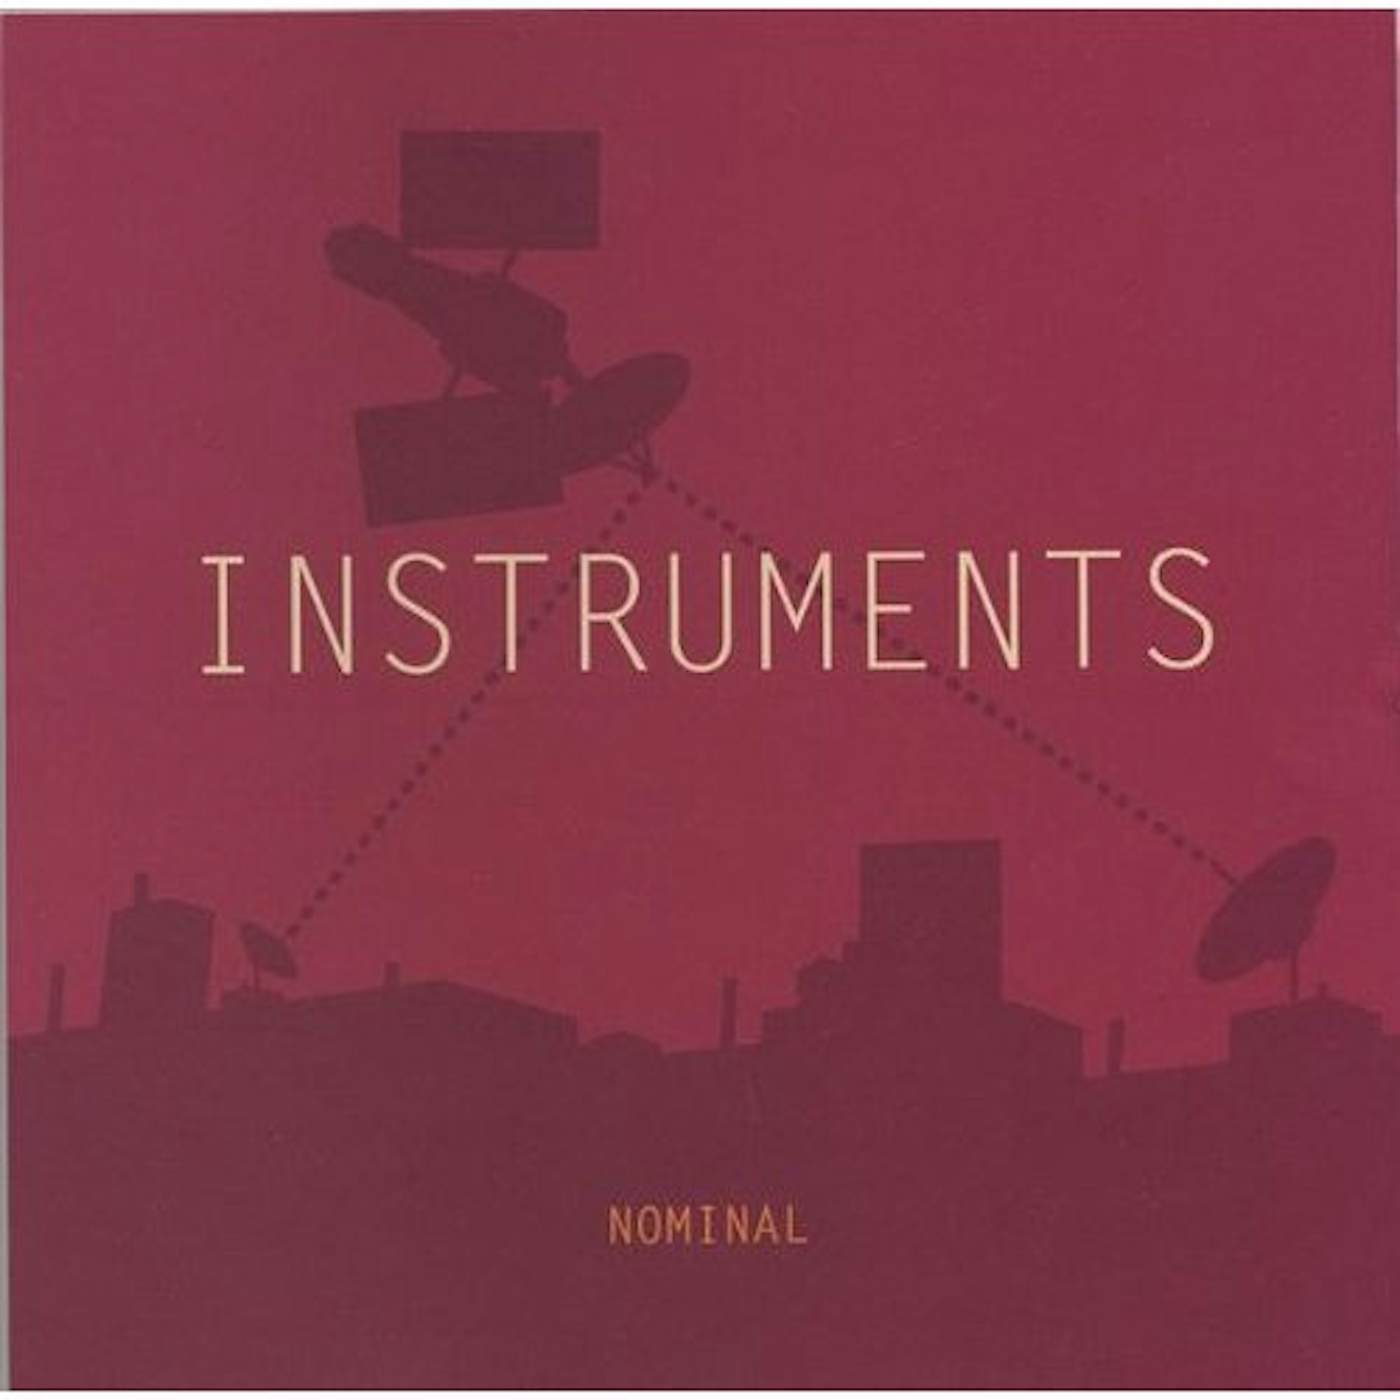 The Instruments NOMINAL CD